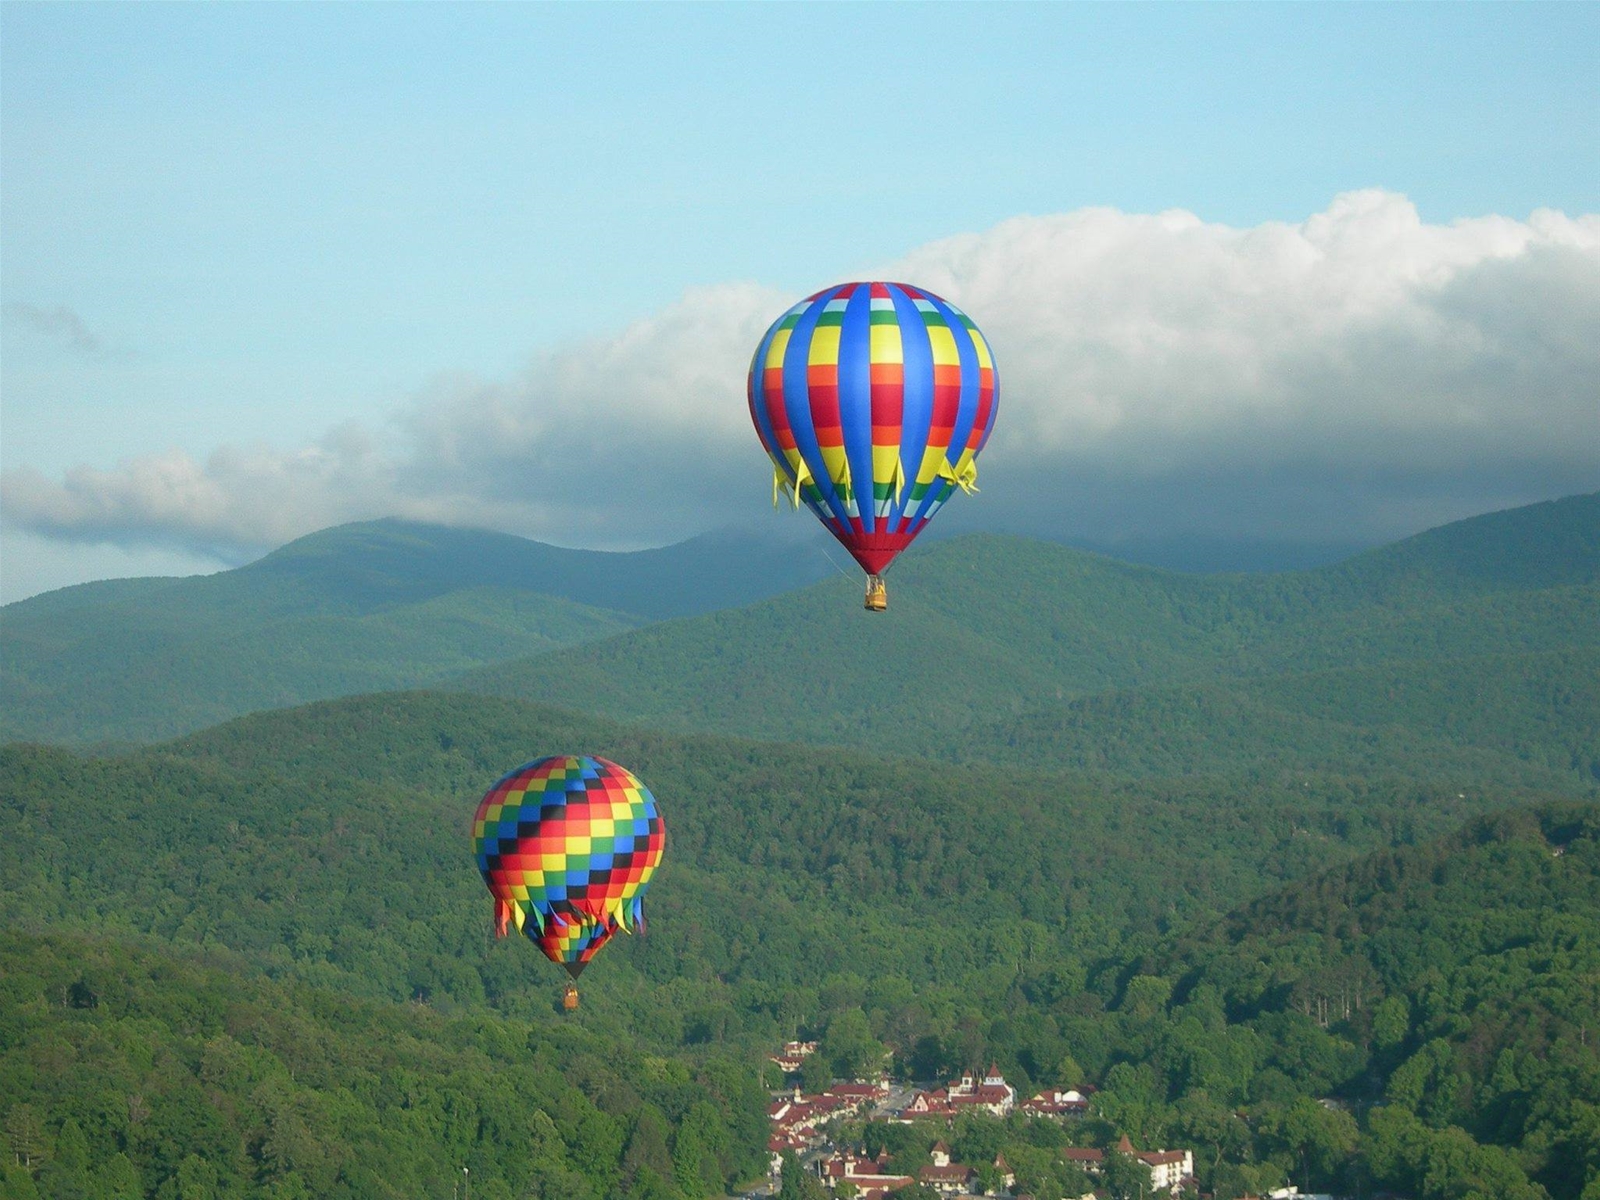 Hot air balloon race over the Mountains of the Chattahoochee National Forest.